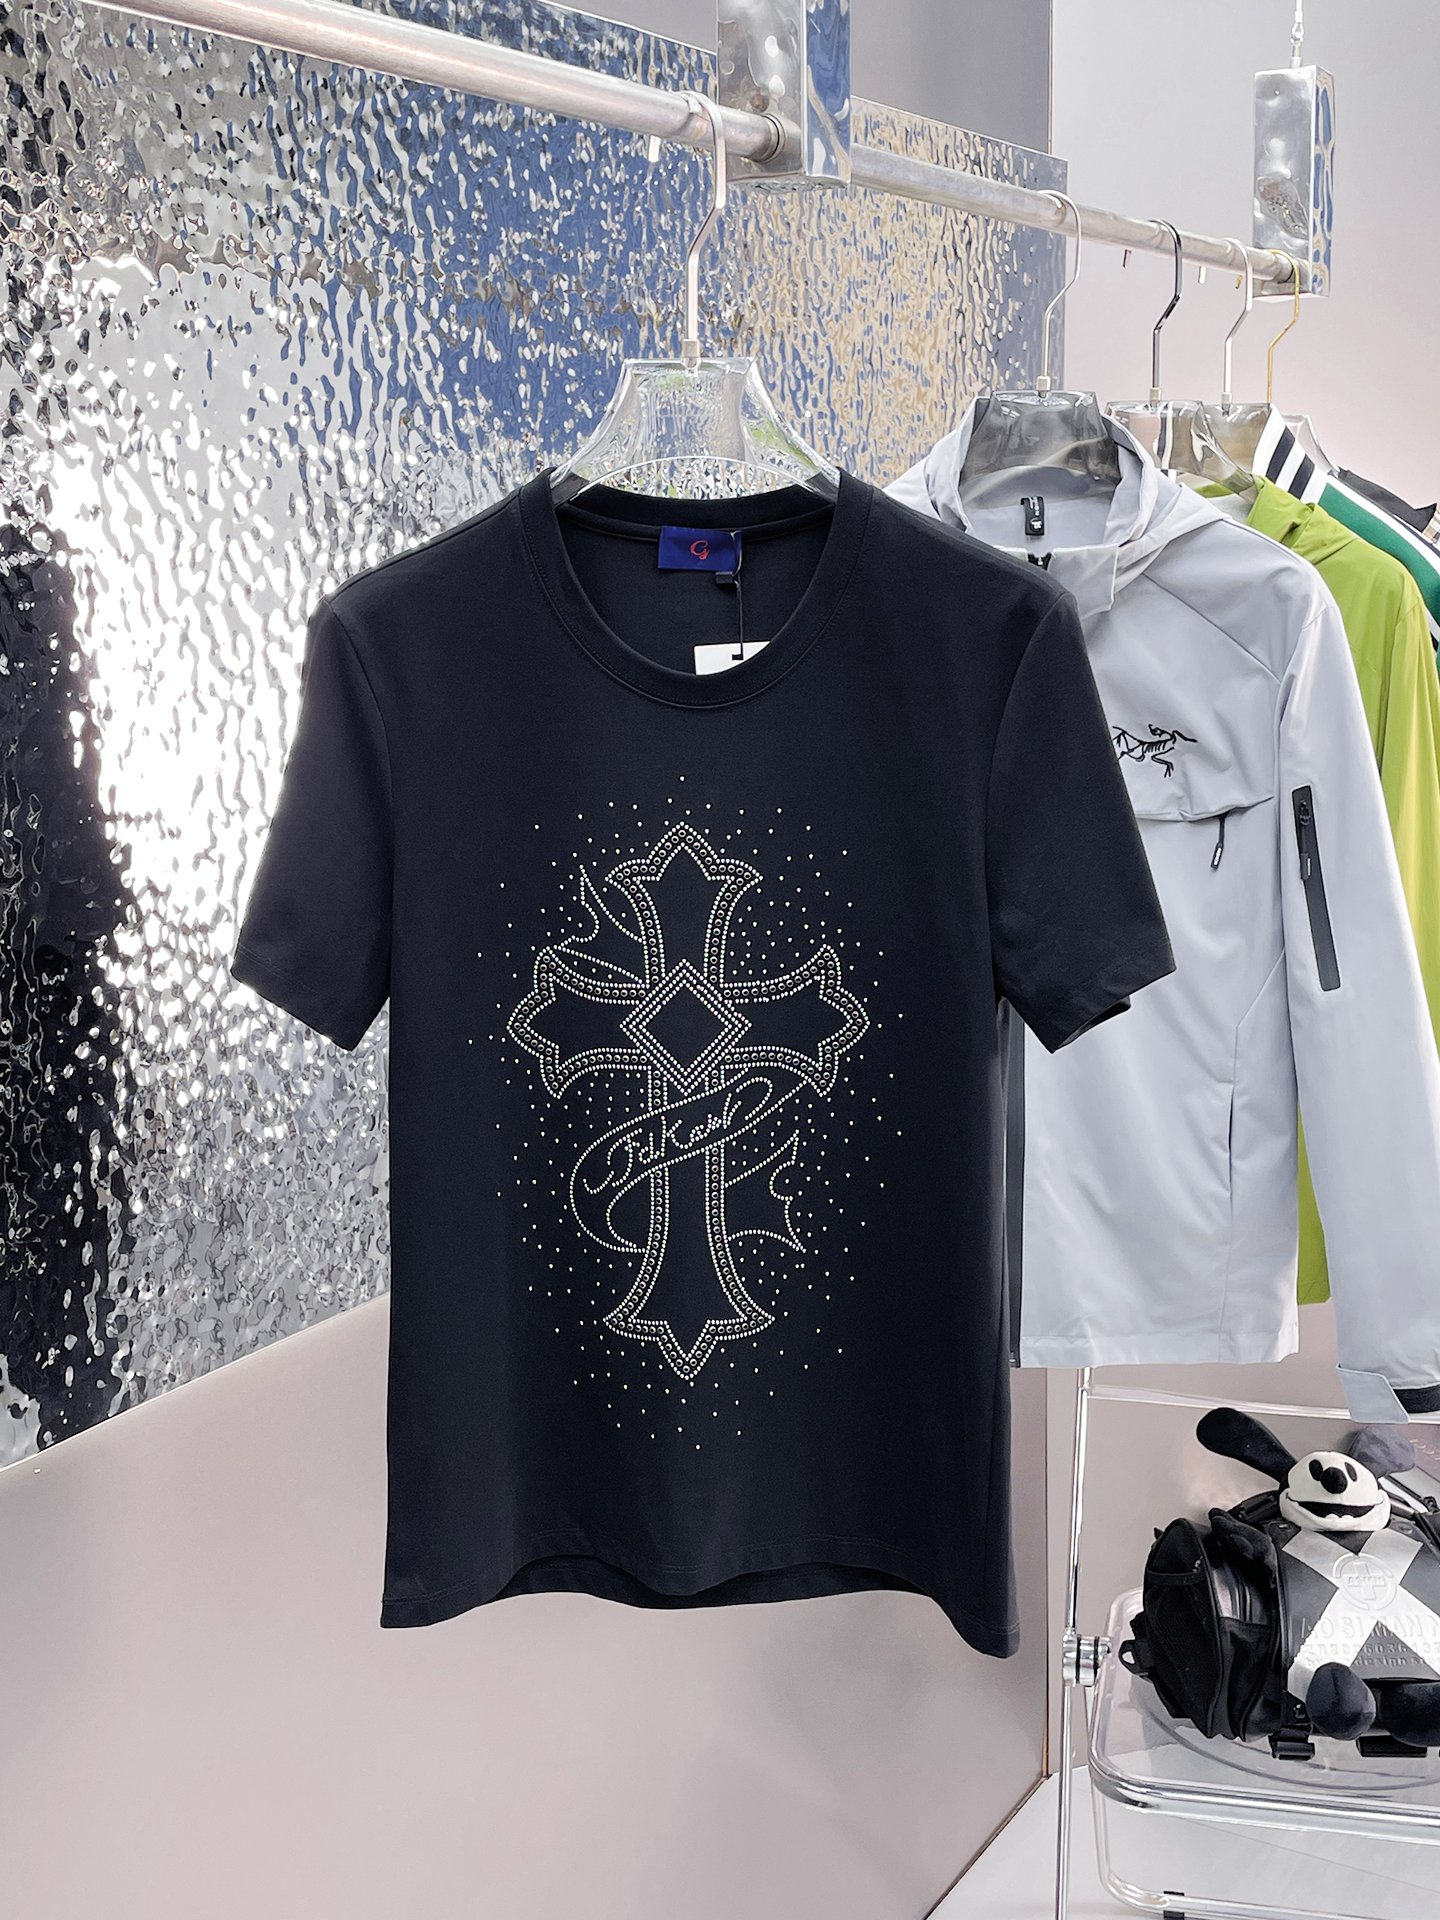 Chrome Hearts Clothing T-Shirt Wholesale Replica
 Summer Collection Fashion Short Sleeve